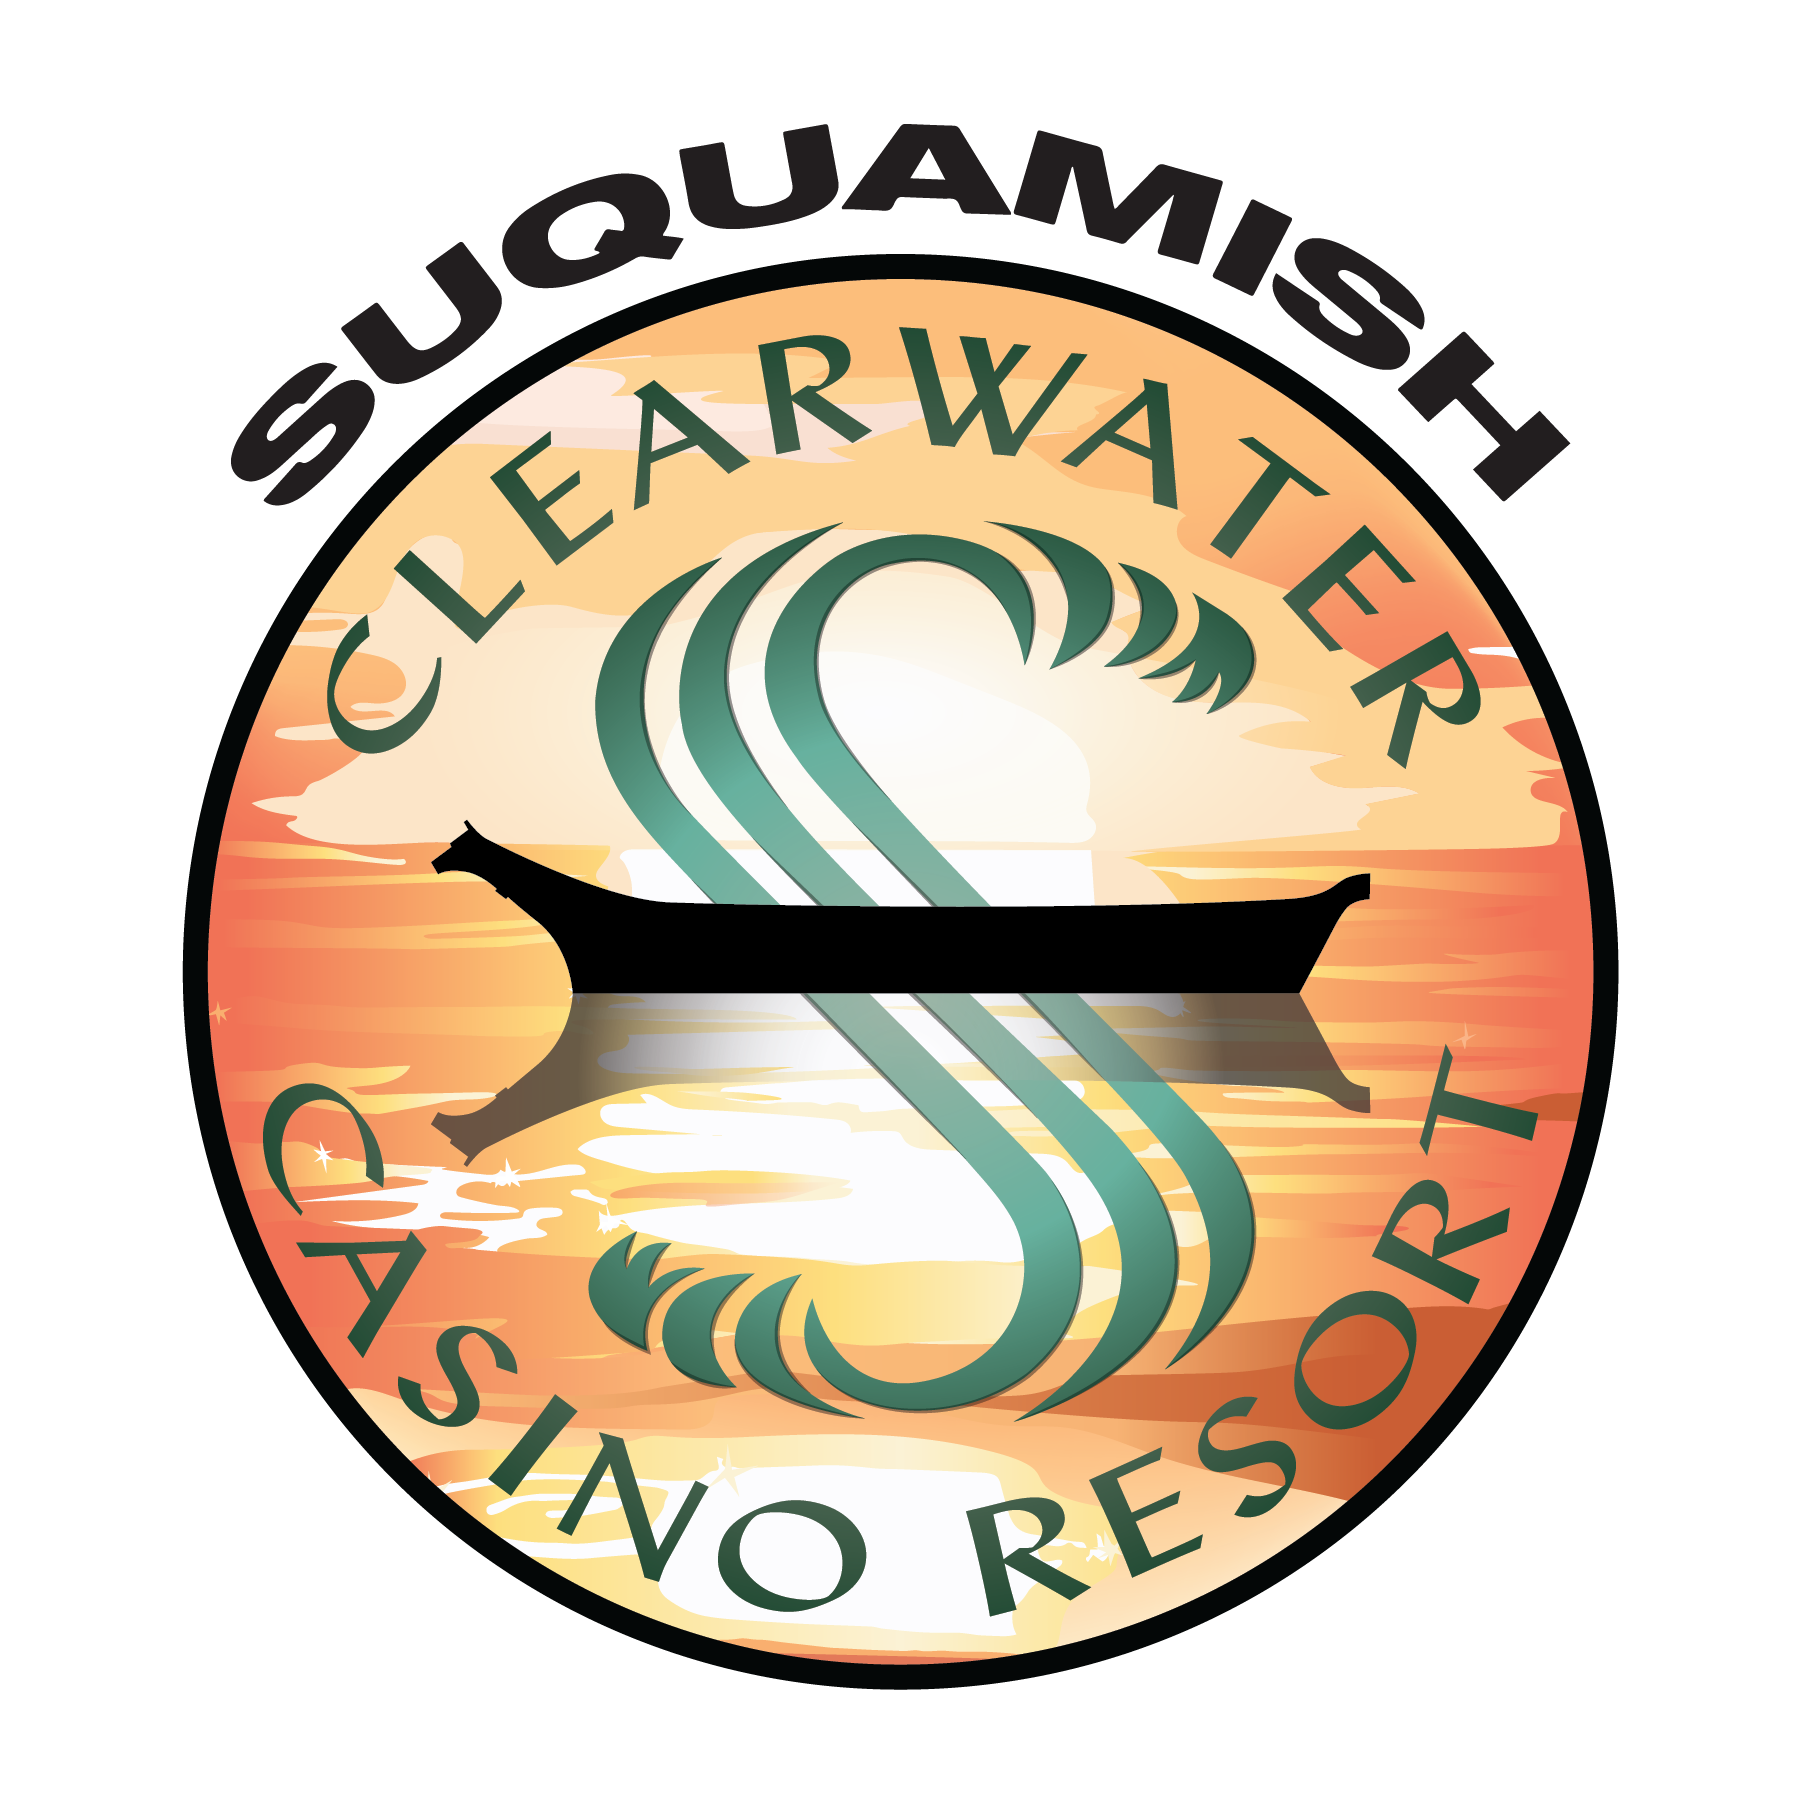 Suquamish Clearwater Casino Resort logo. A gold circle with the word Suquamish above. Inside the circle, along the top arc, it says Clearwater. The bottom arc says Casino Resort. In the middle of the circle is a simple image of a black canoe on water with a silhouette. Woven through the canoe is the letter S.